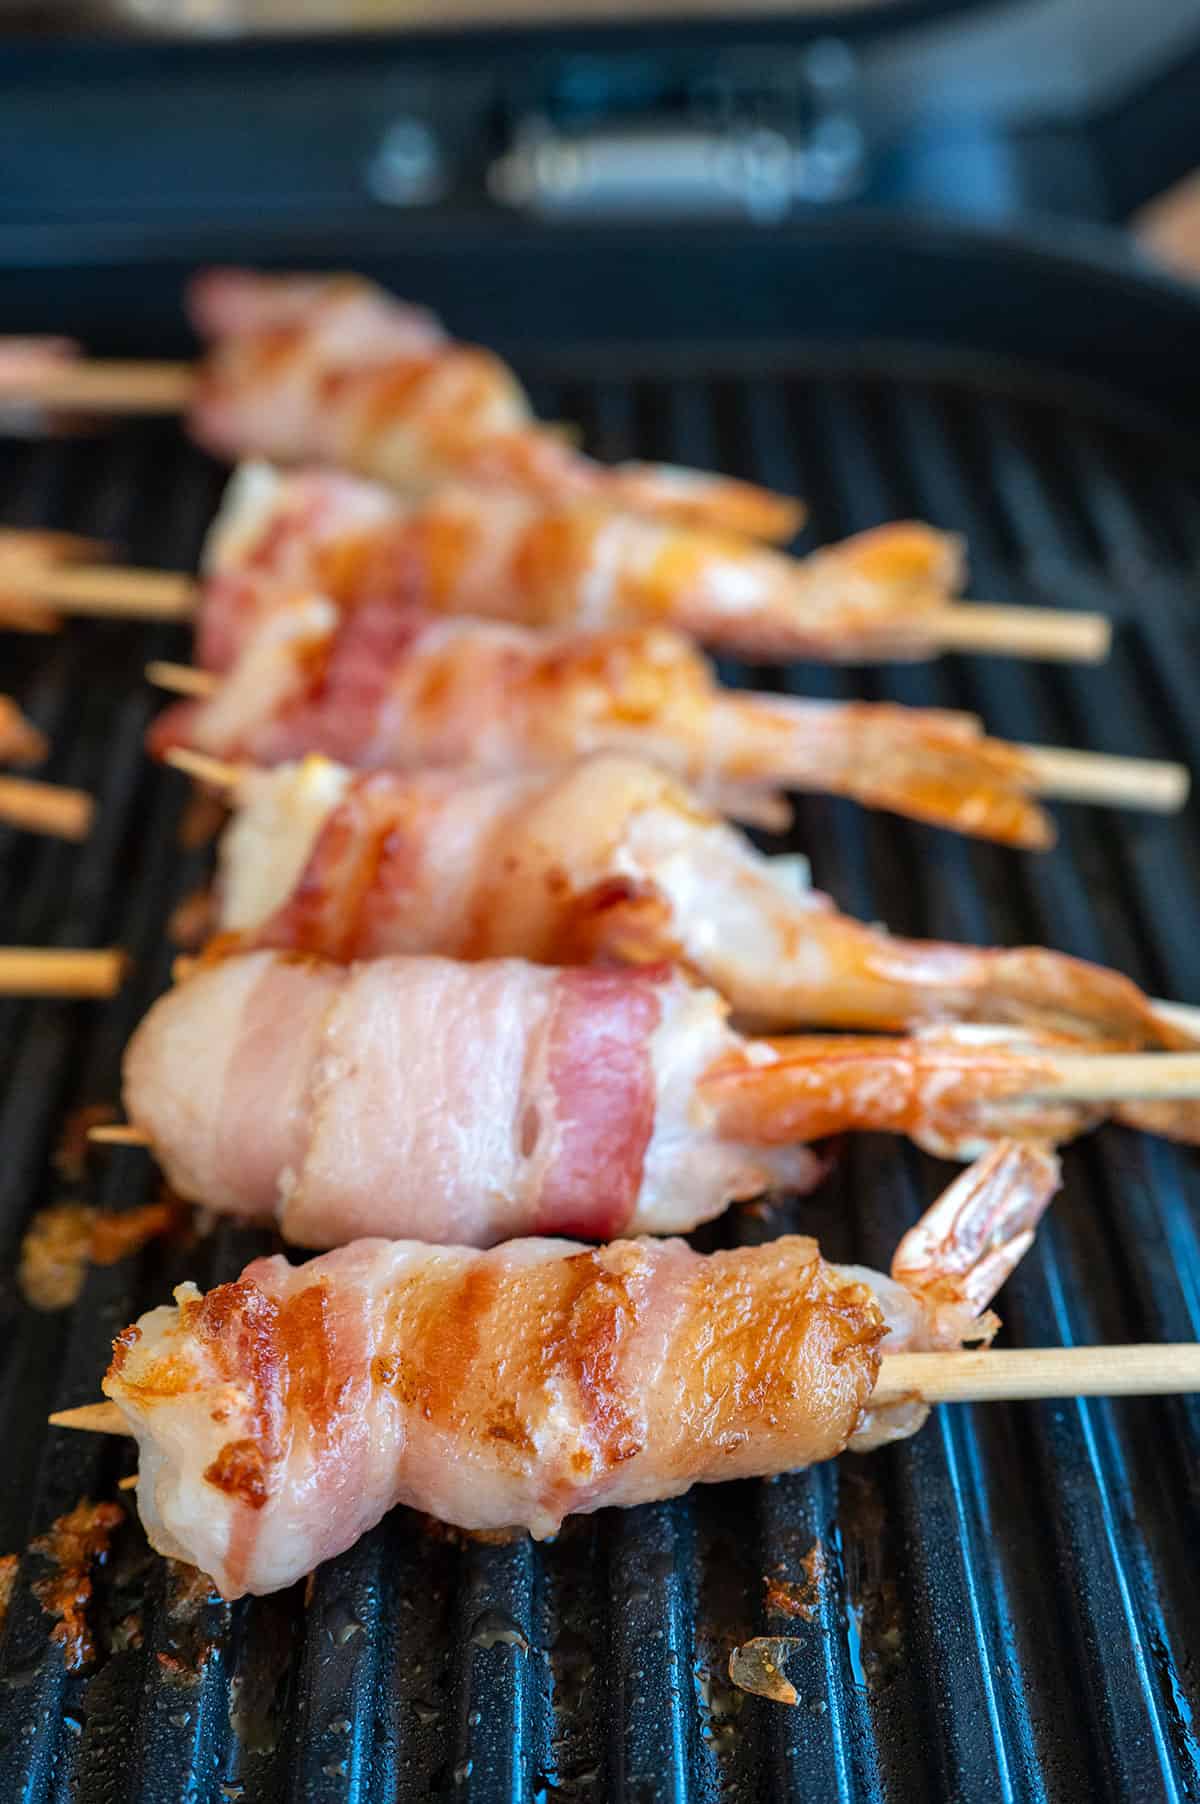 Bacon wrapped shrimp after grilling for 8 minutes.